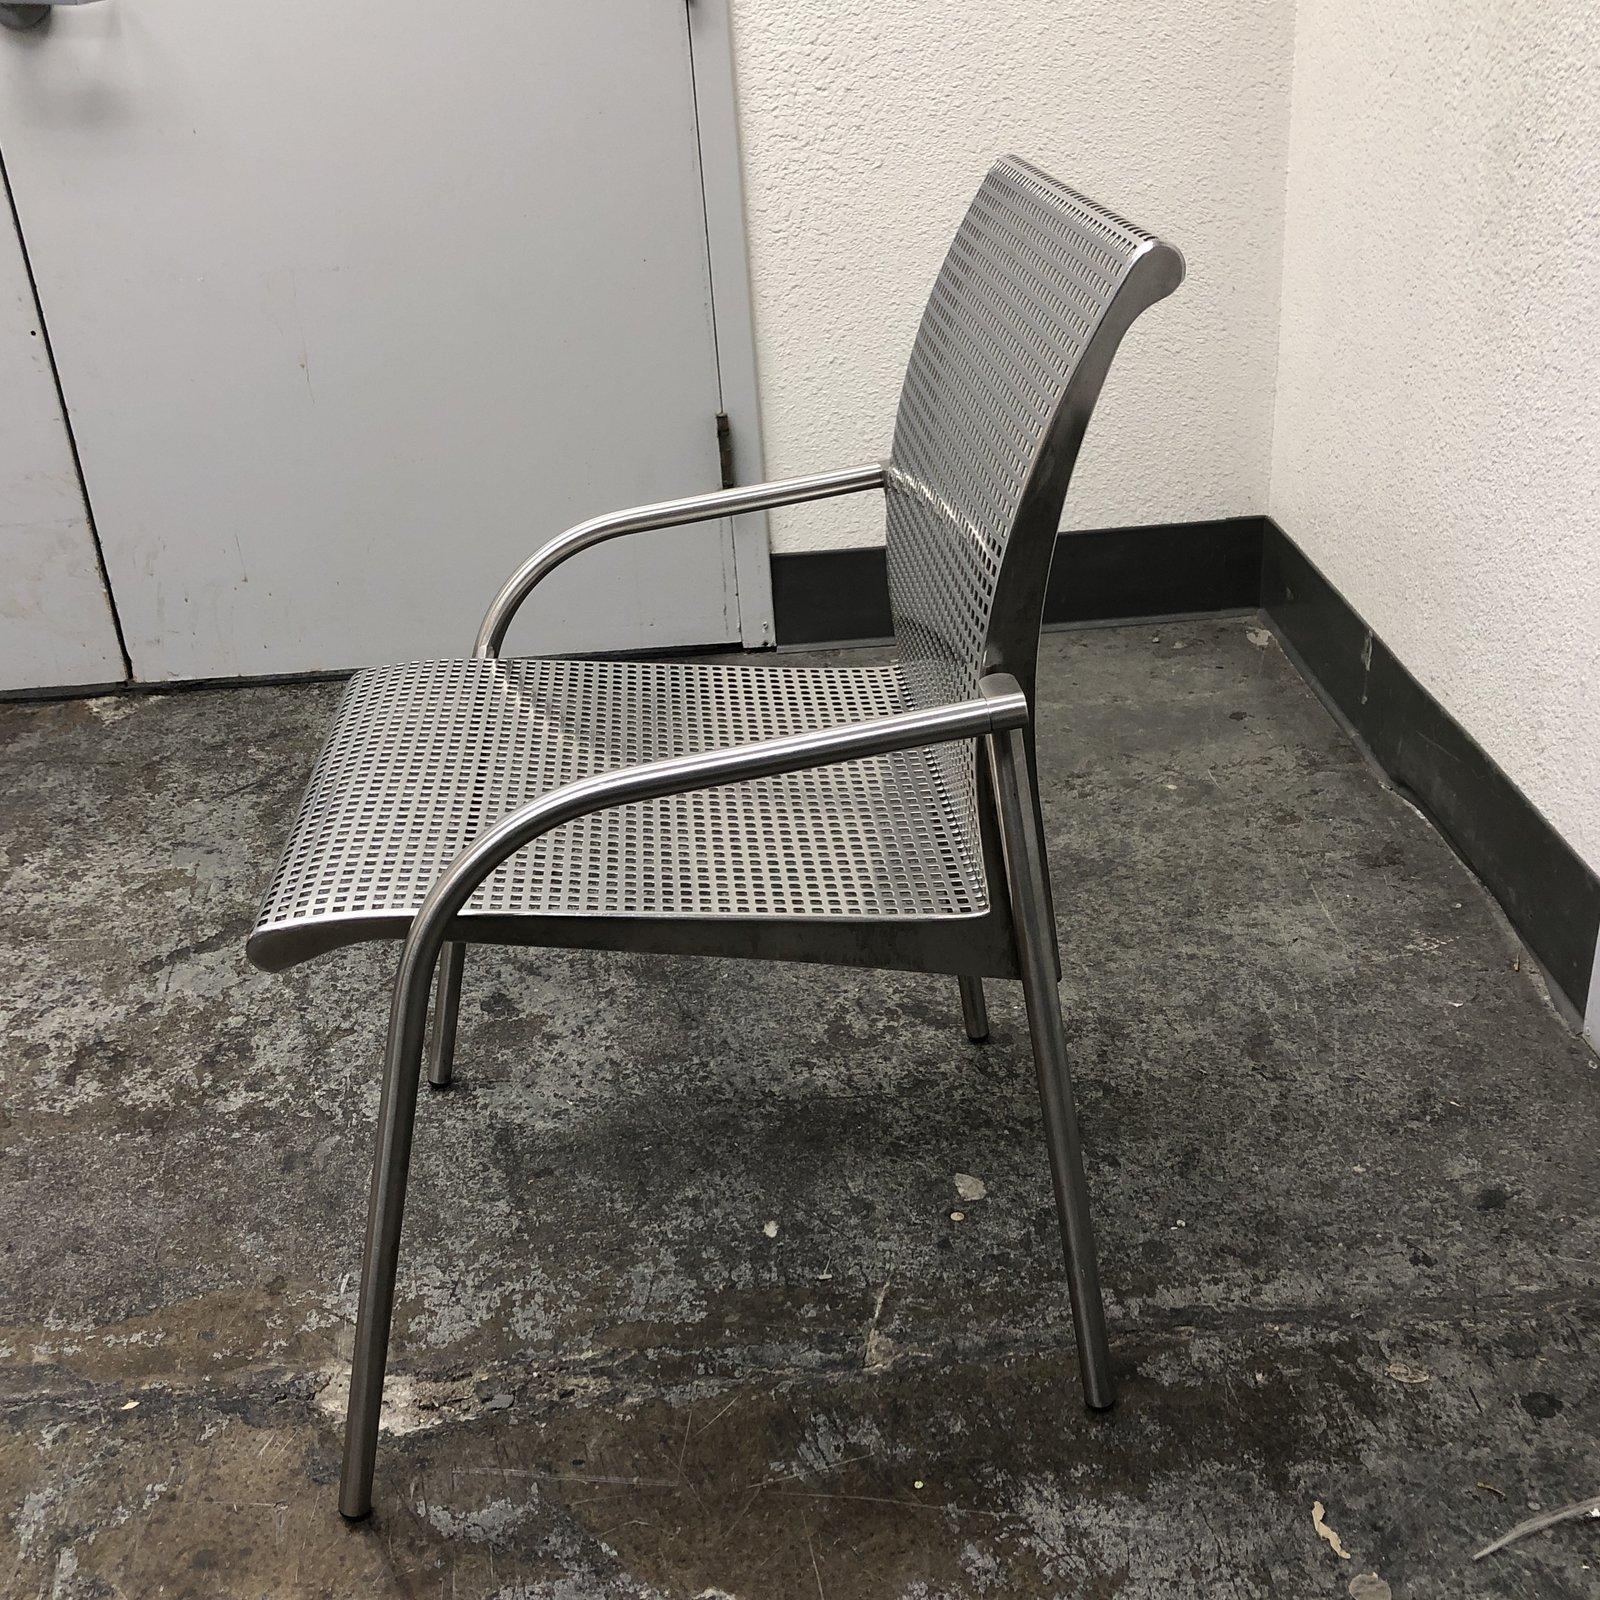 A Knoll style stainless steel armchair. Elegant design, made to last and built to withstand many environments. The stainless steel can add a great accent to a room. Measures: Arm height 22 inches, seat height 18 inches.

  